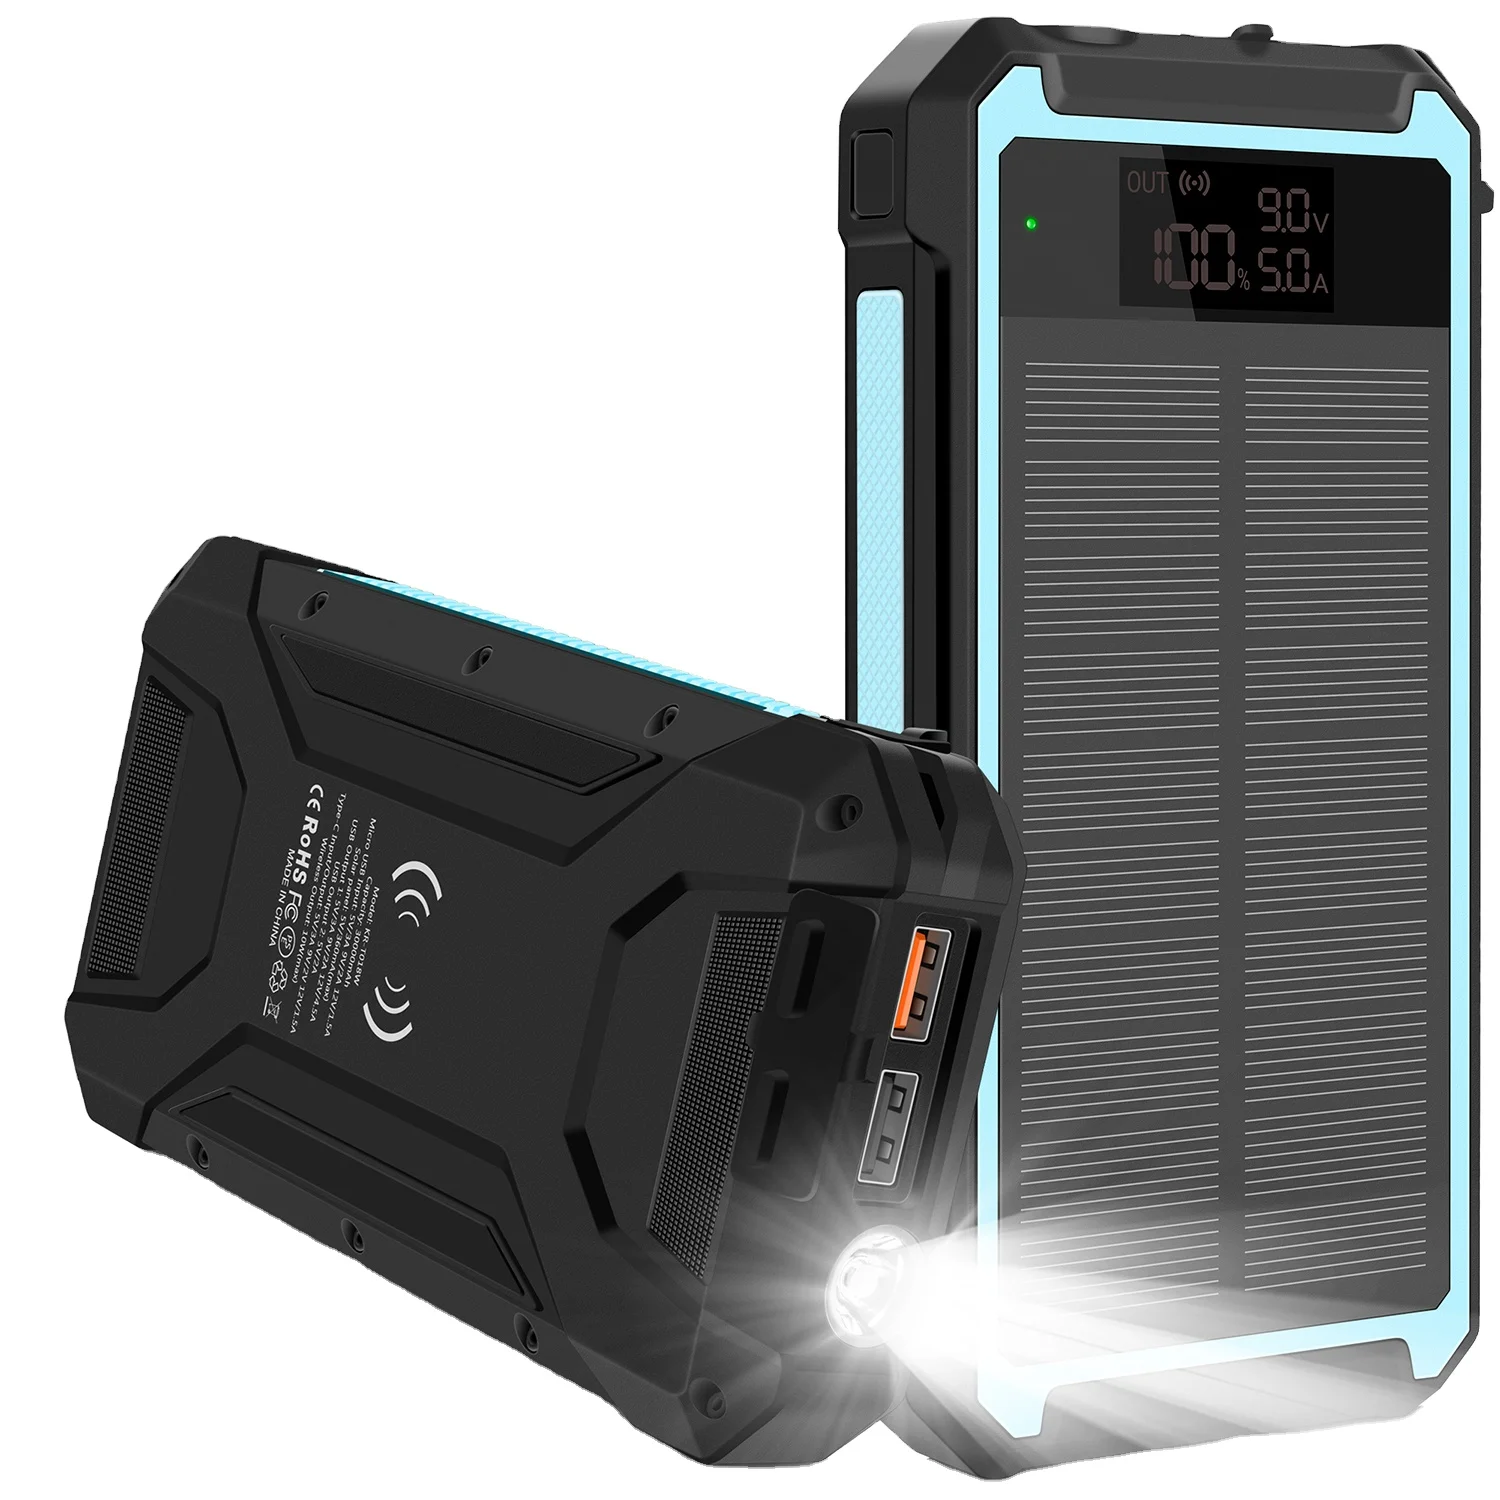 

LED Light Mobile Portable Solar Panels Energy Powered Wireless Charging 30000mah Batteries Charger Waterproof Solar Power Bank